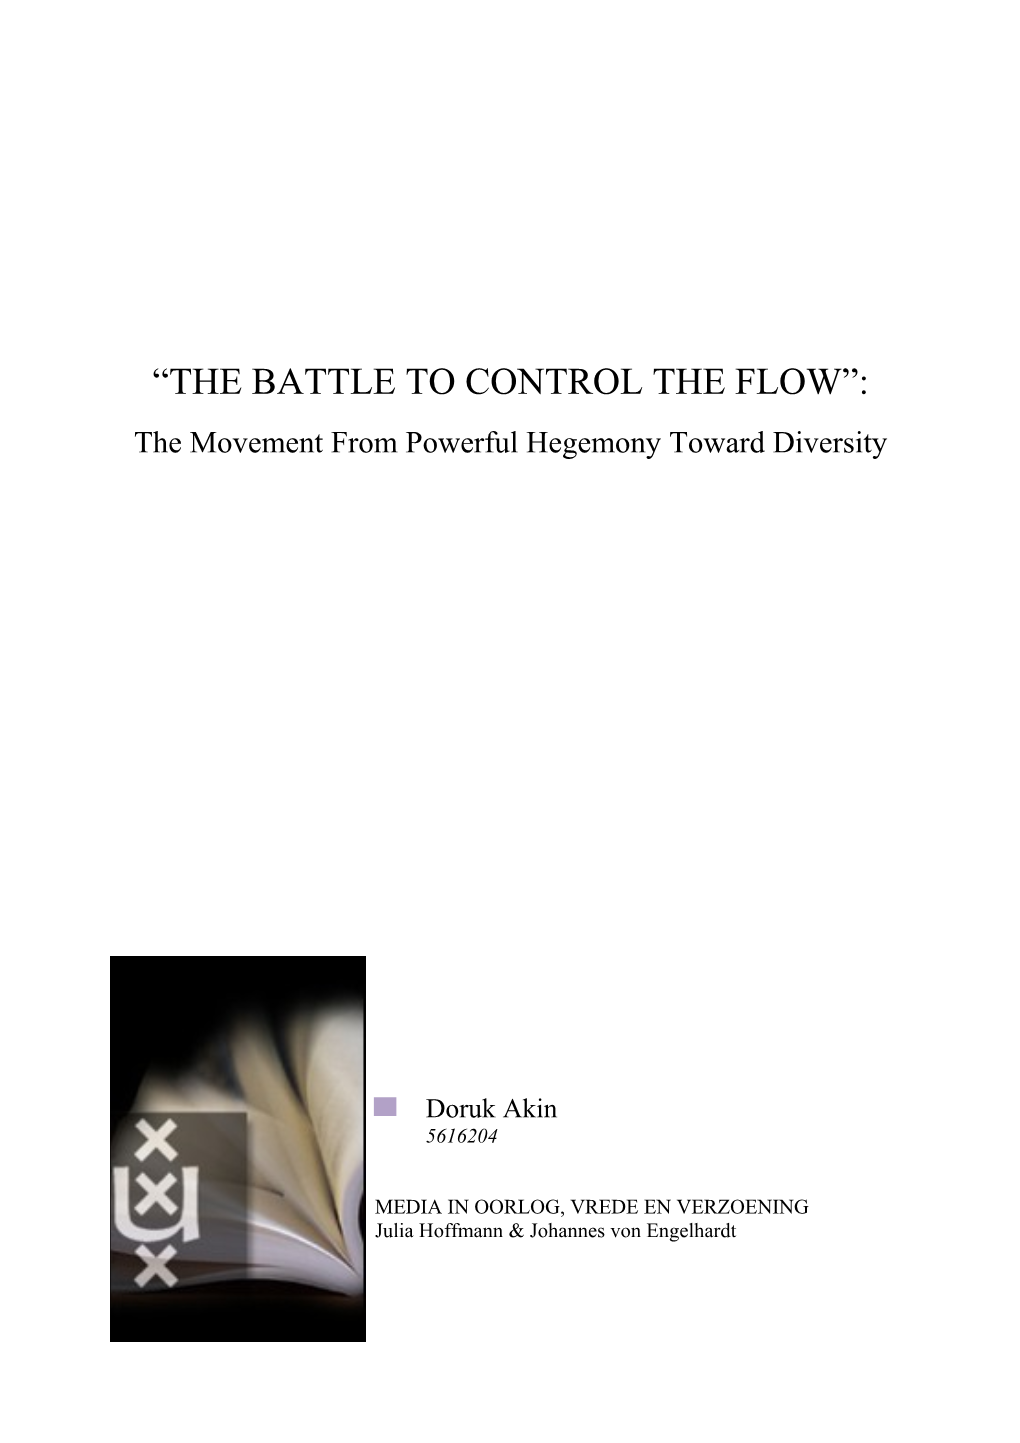 Bachelor Thesis the Battle to Control the Flow